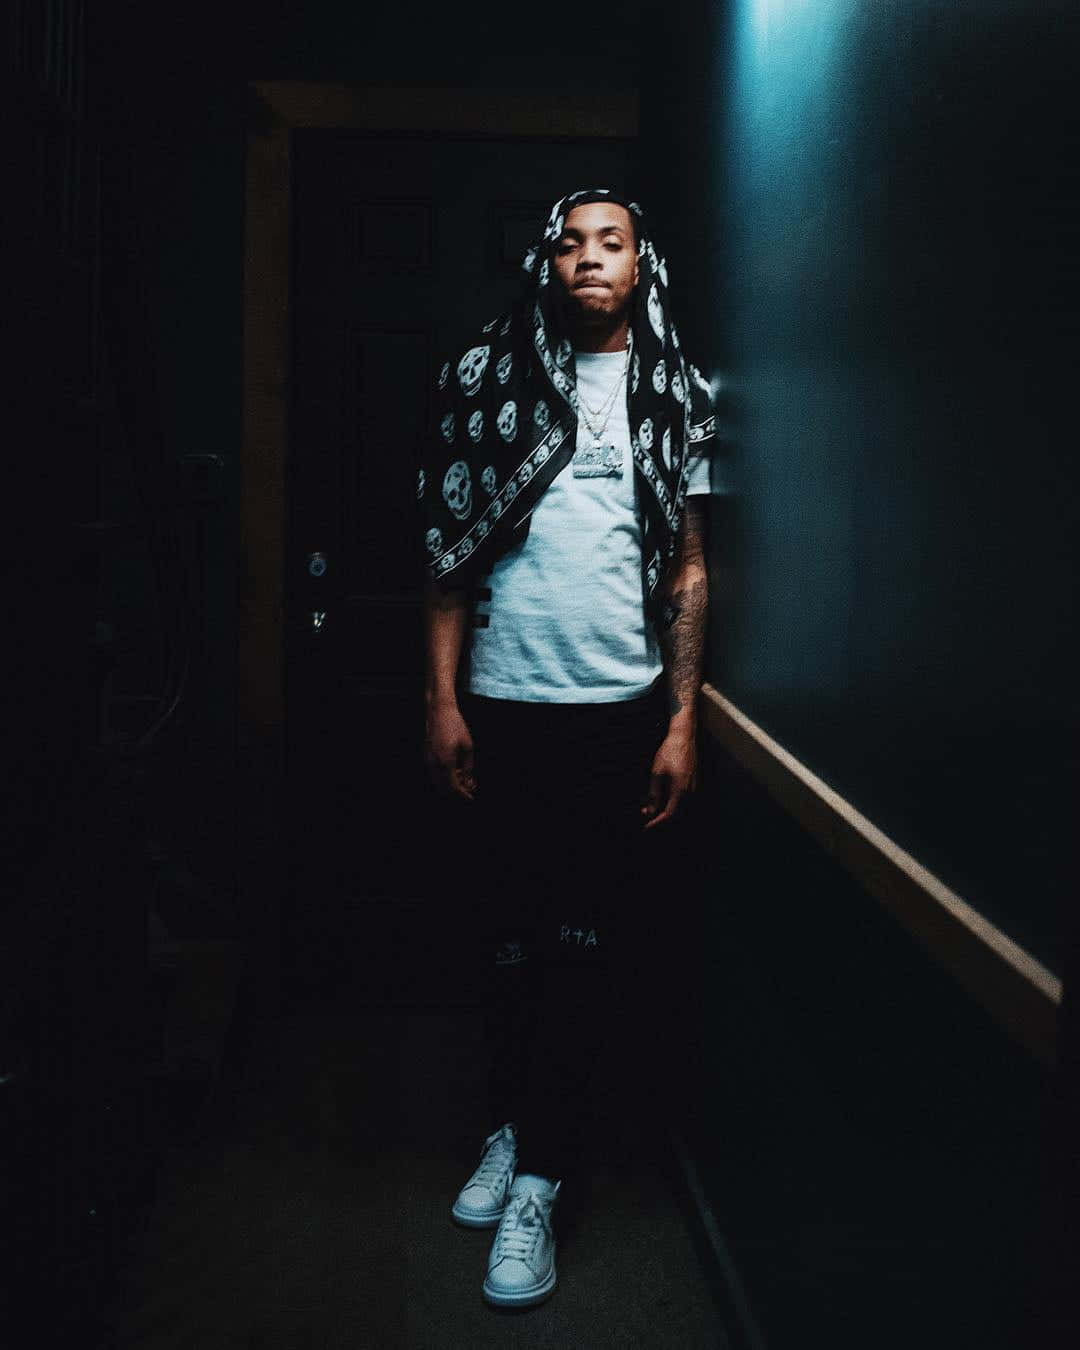 Show off your style with the Herbo Iphone. Wallpaper